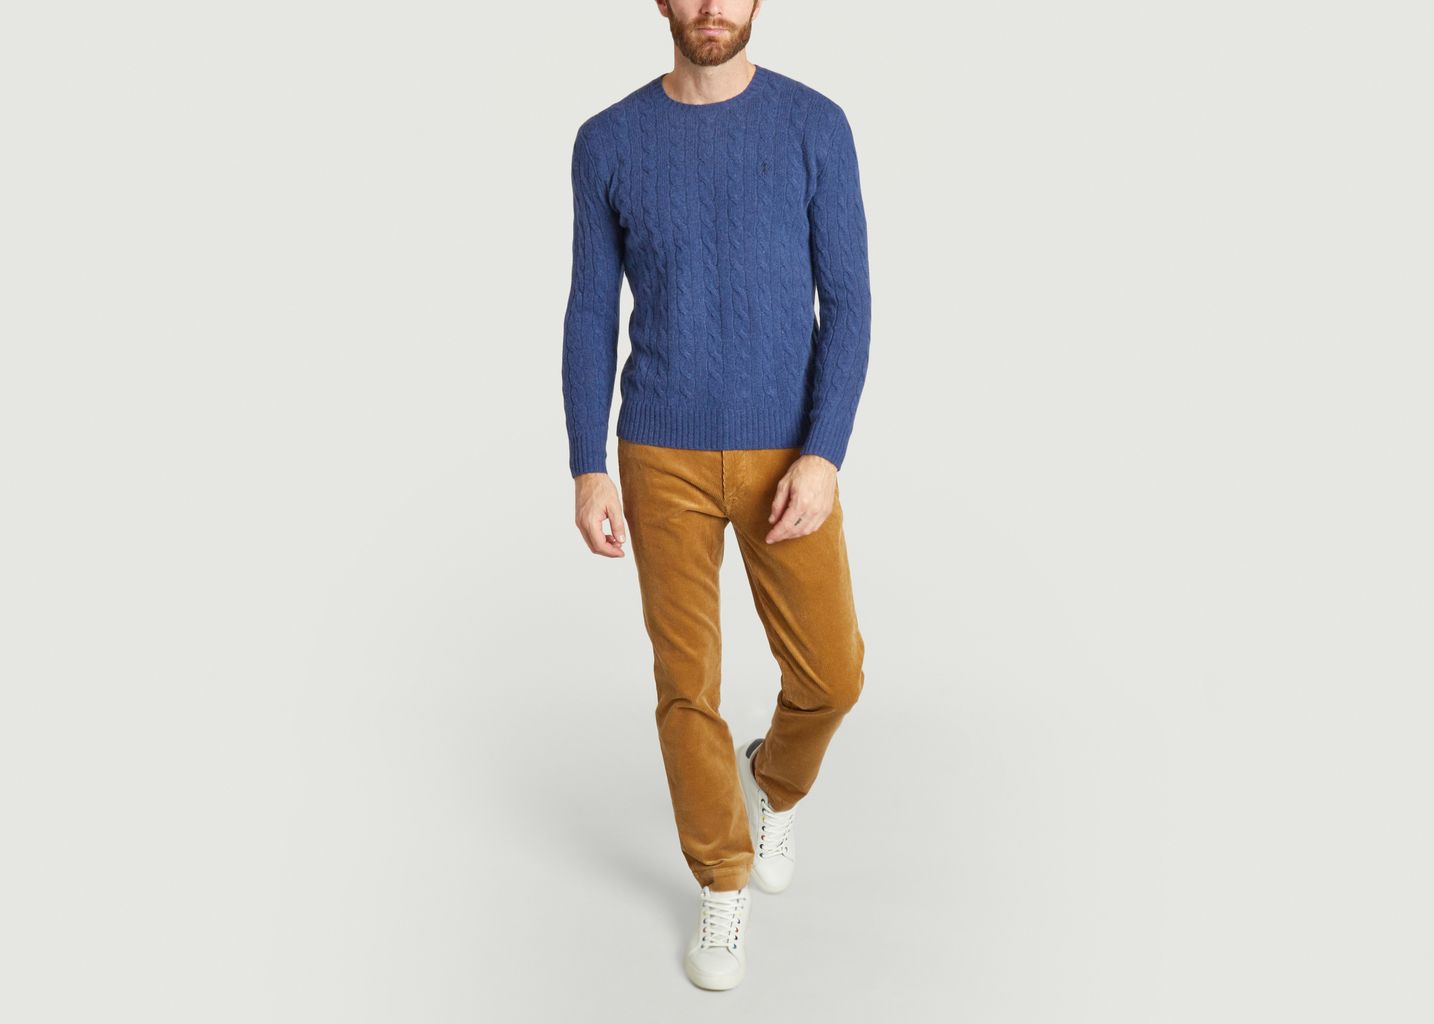 Cable knit sweater - Polo Ralph Lauren